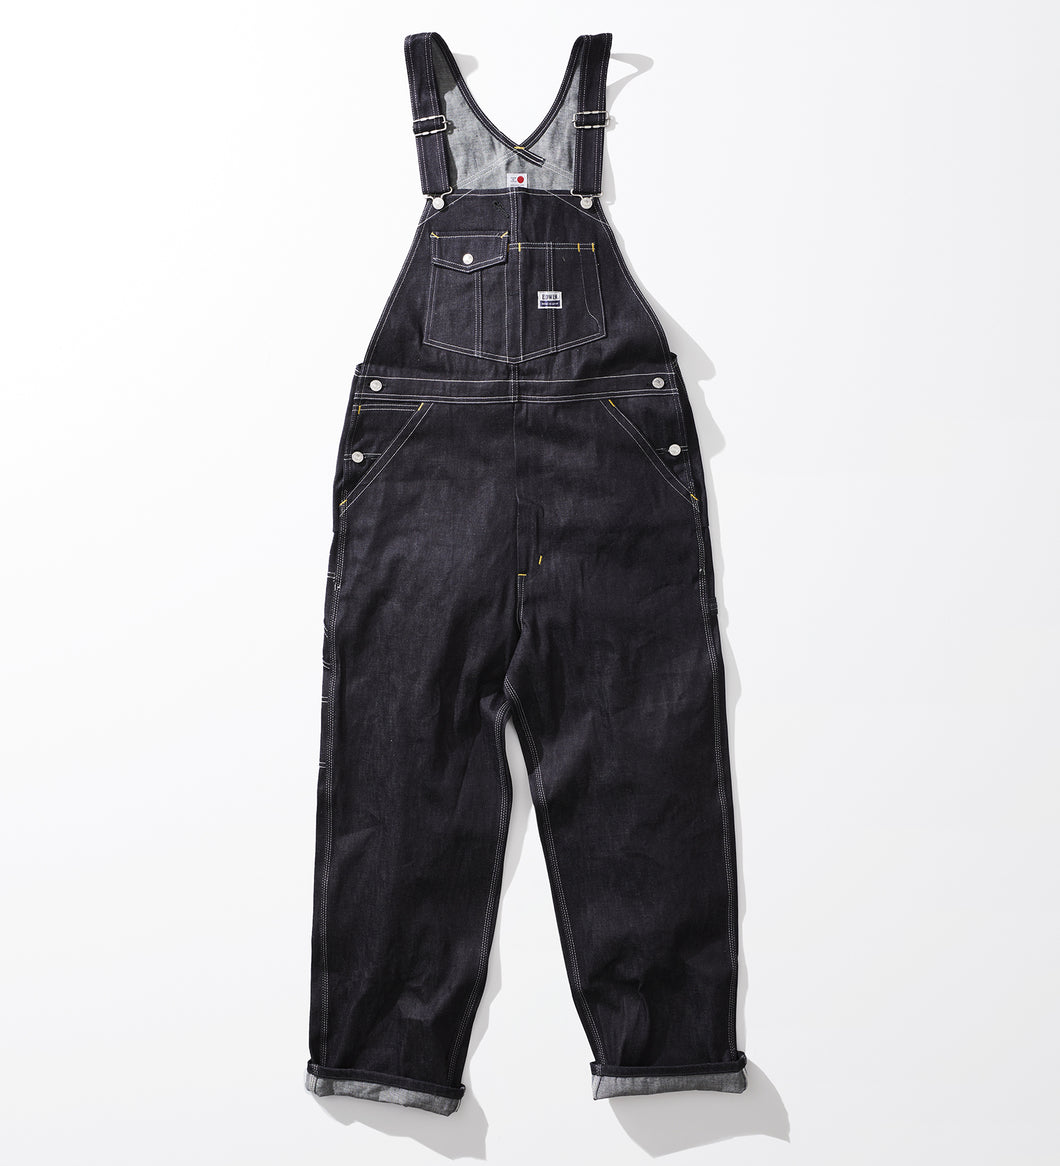 OVERALL Unwashed